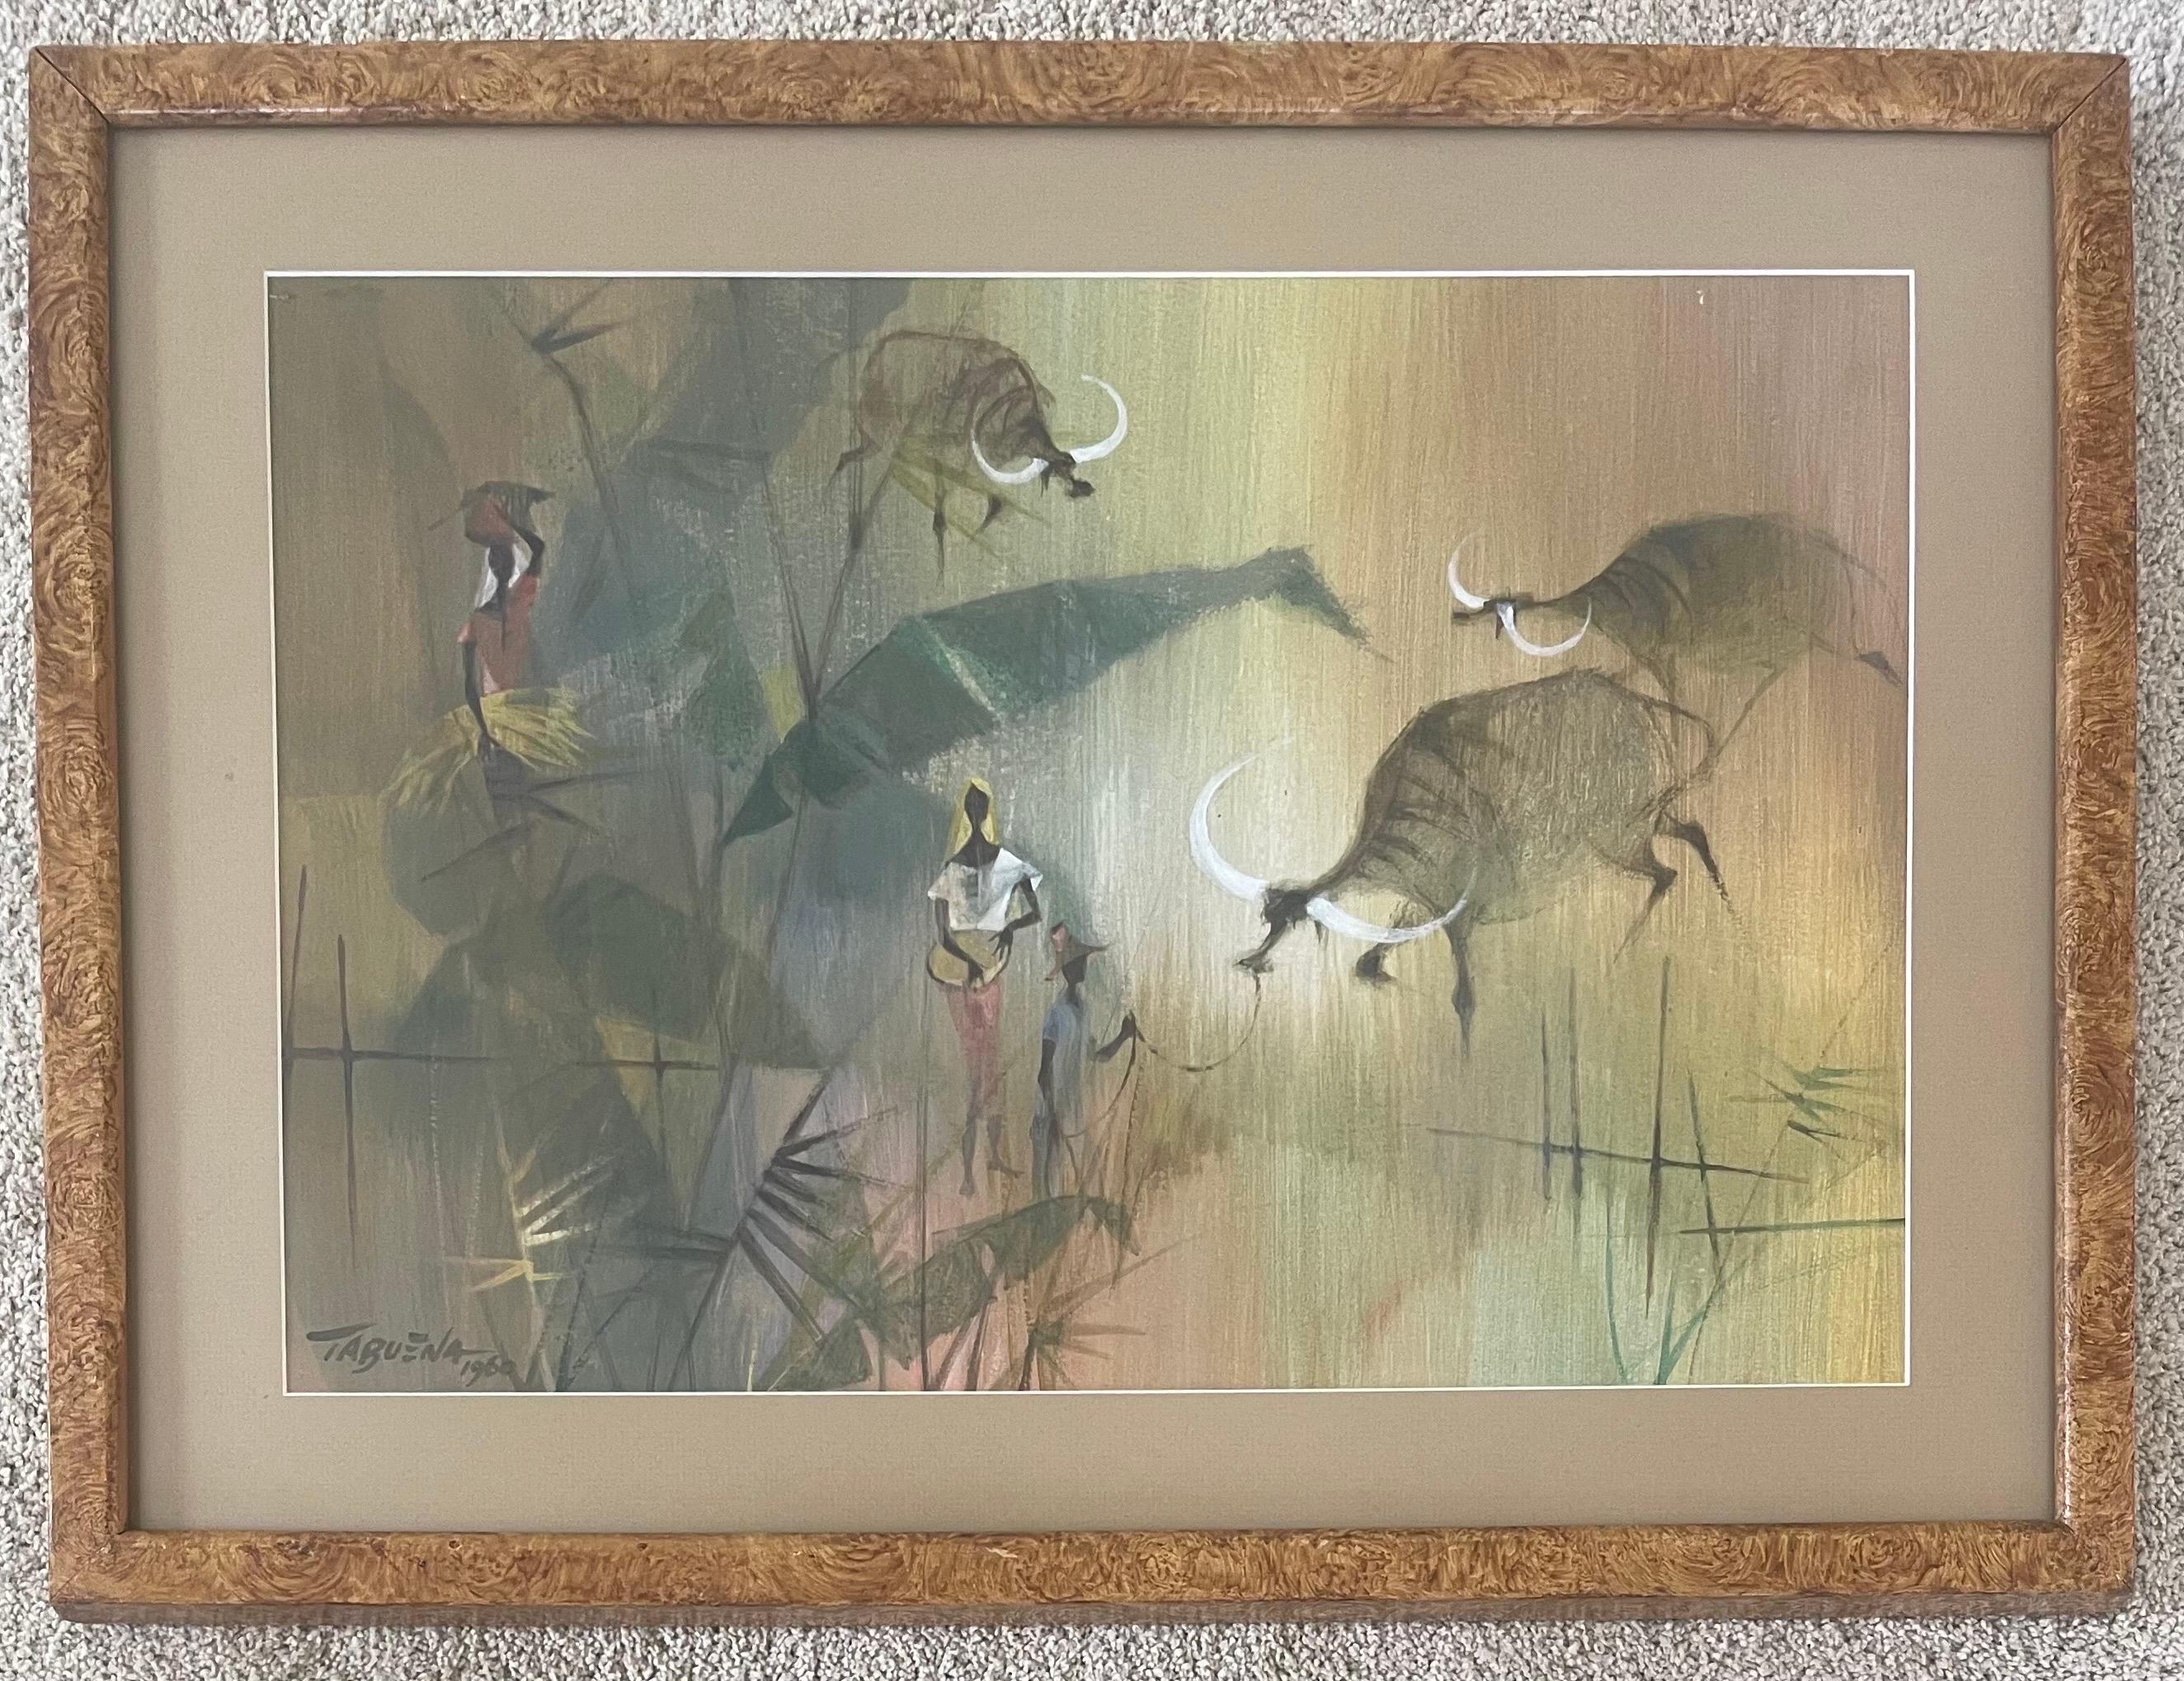 Original watercolor on board painting of Water Buffaloes by renowned Filipino  artist Romeo Villalva Tabuena, circa 1960.   The painting is very bright and colorful and measures 26